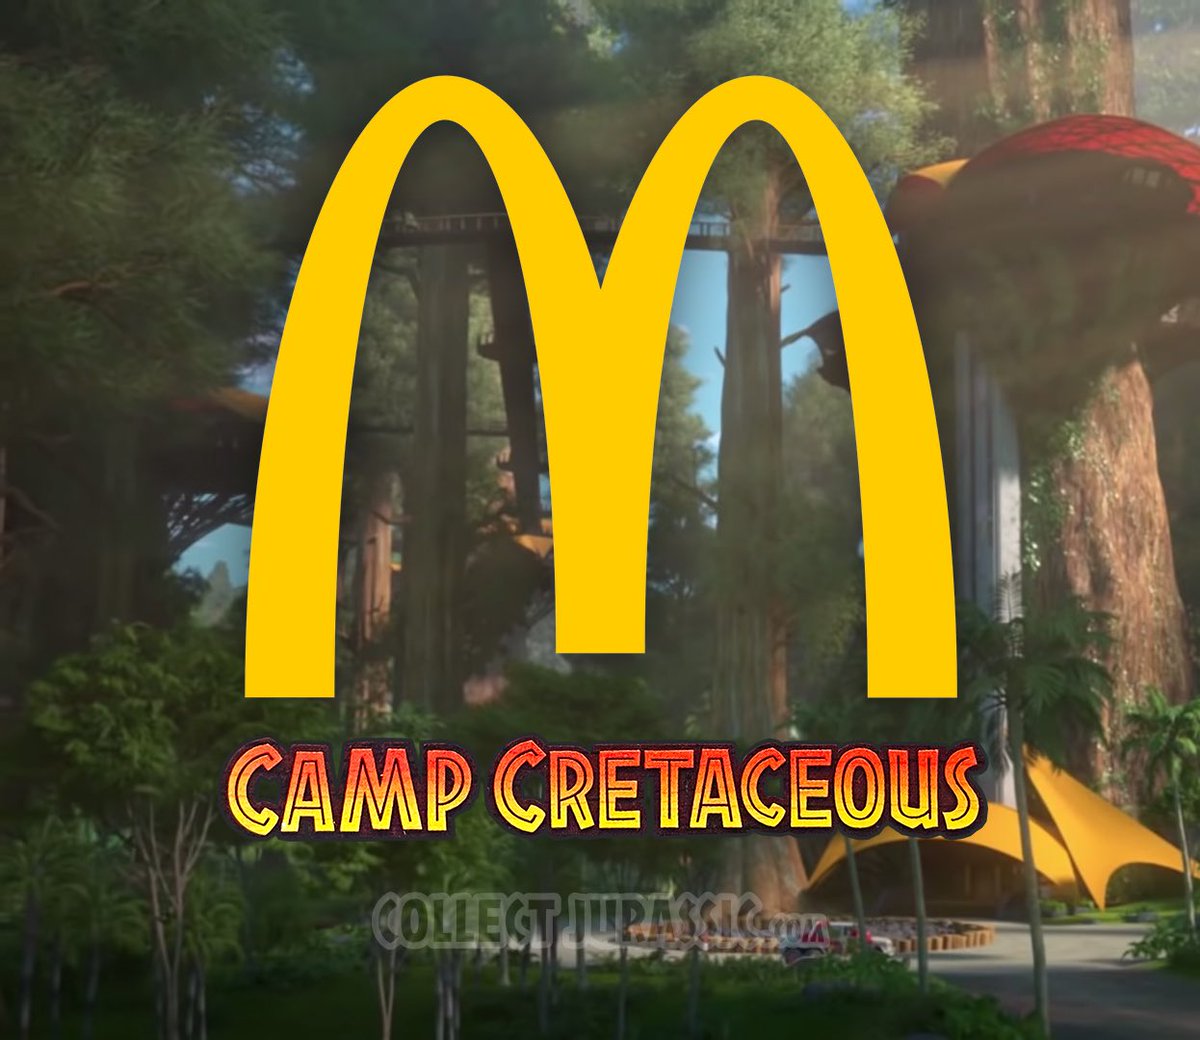 Collect Jurassic We Re Lovin It Sounds Like Jurassic World Camp Cretaceous Is Headed To Us Mcdonald S Locations Starting This September We Have It In Good Authority That Happy Meal Toys